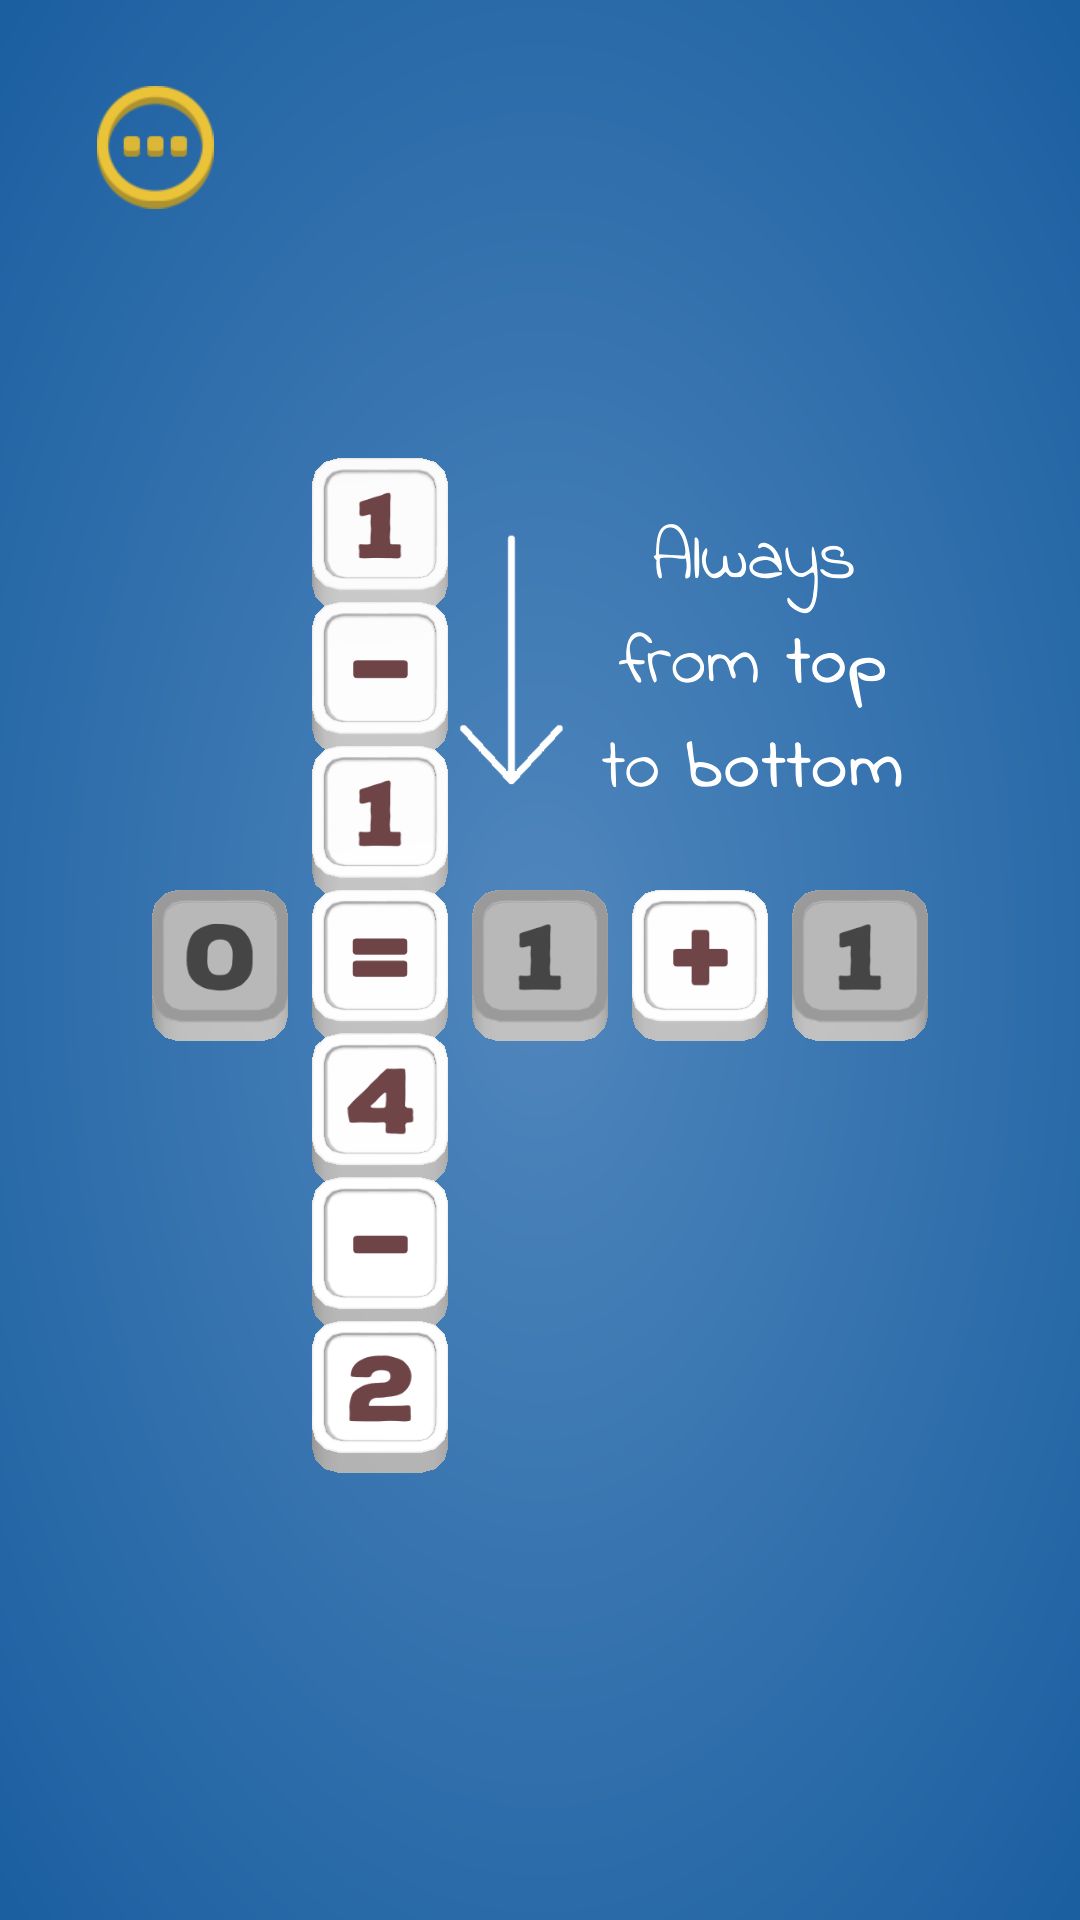 Numerico for Android